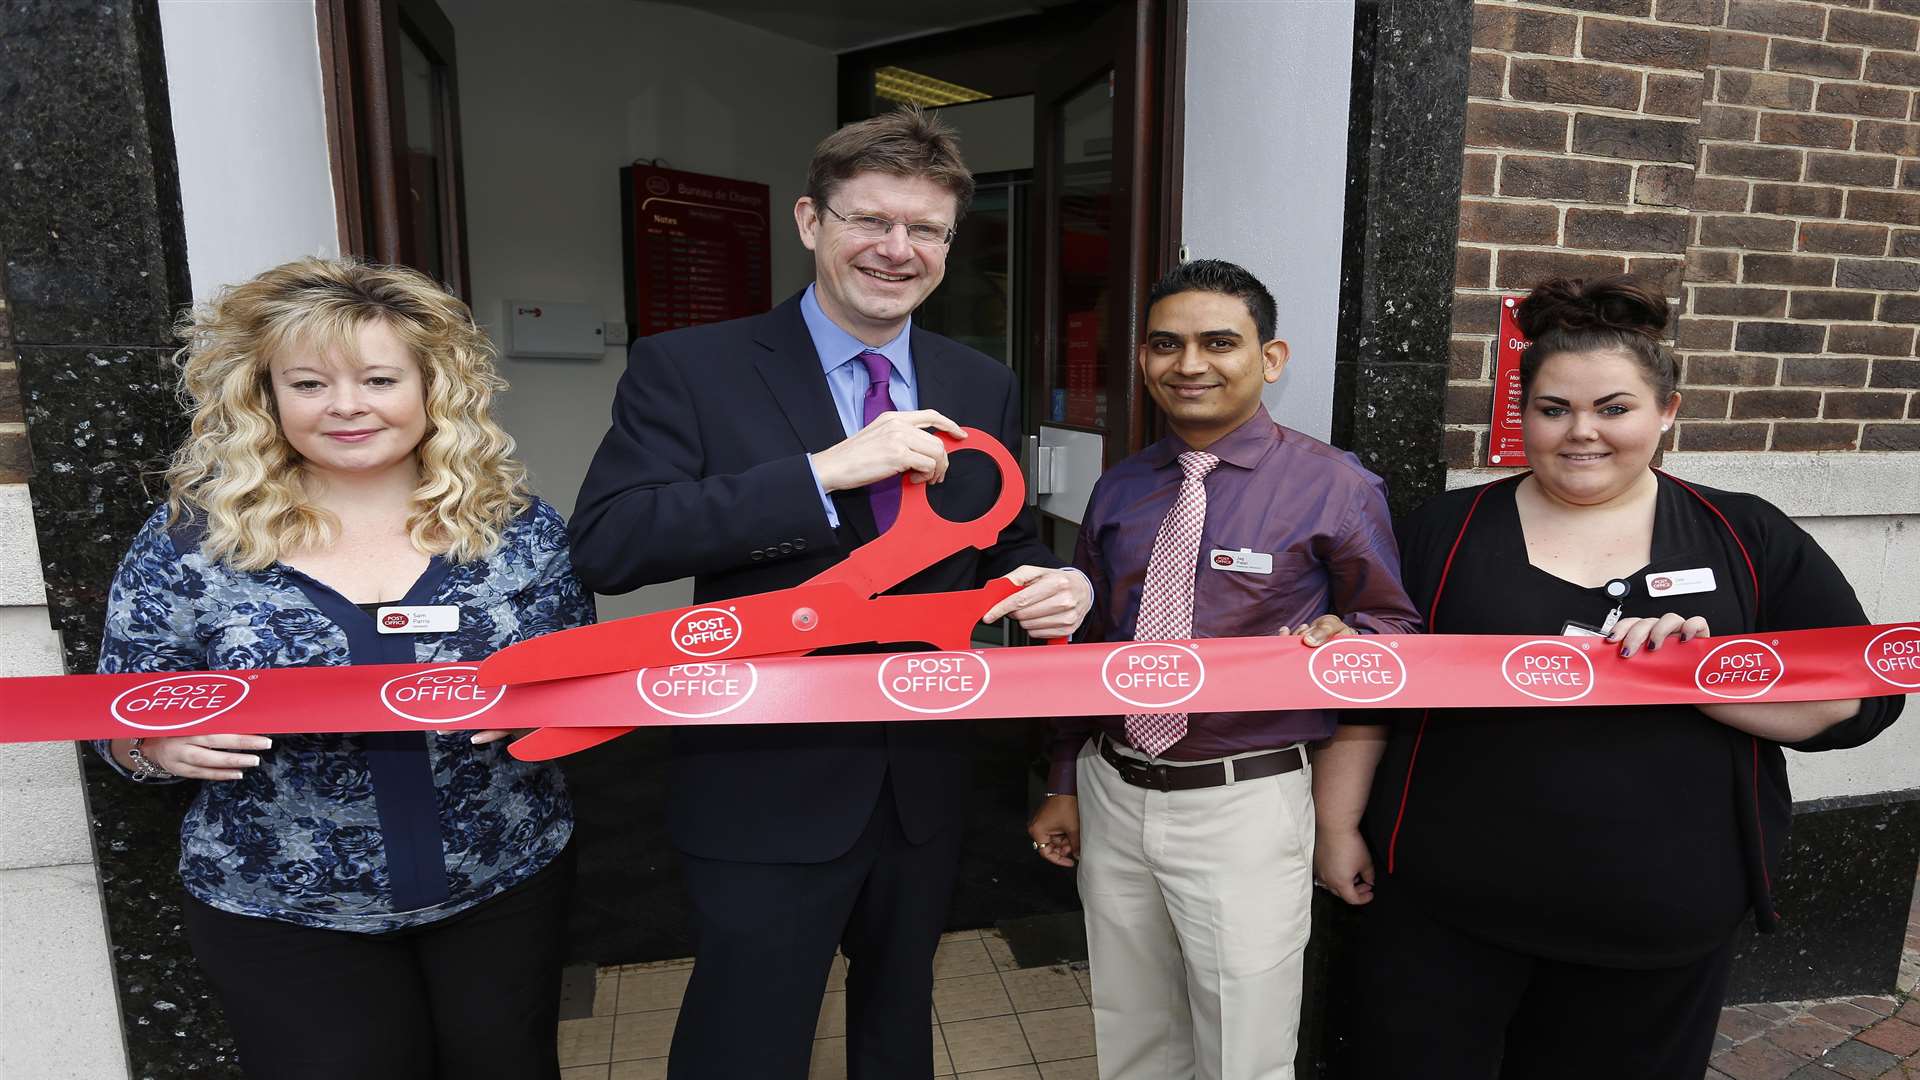 Five Ways Post Office Manager Sam Parris, MP Greg Clark, Financial Specialist Jag Patel and Mails Specialist Marisa Willoughby-Jones